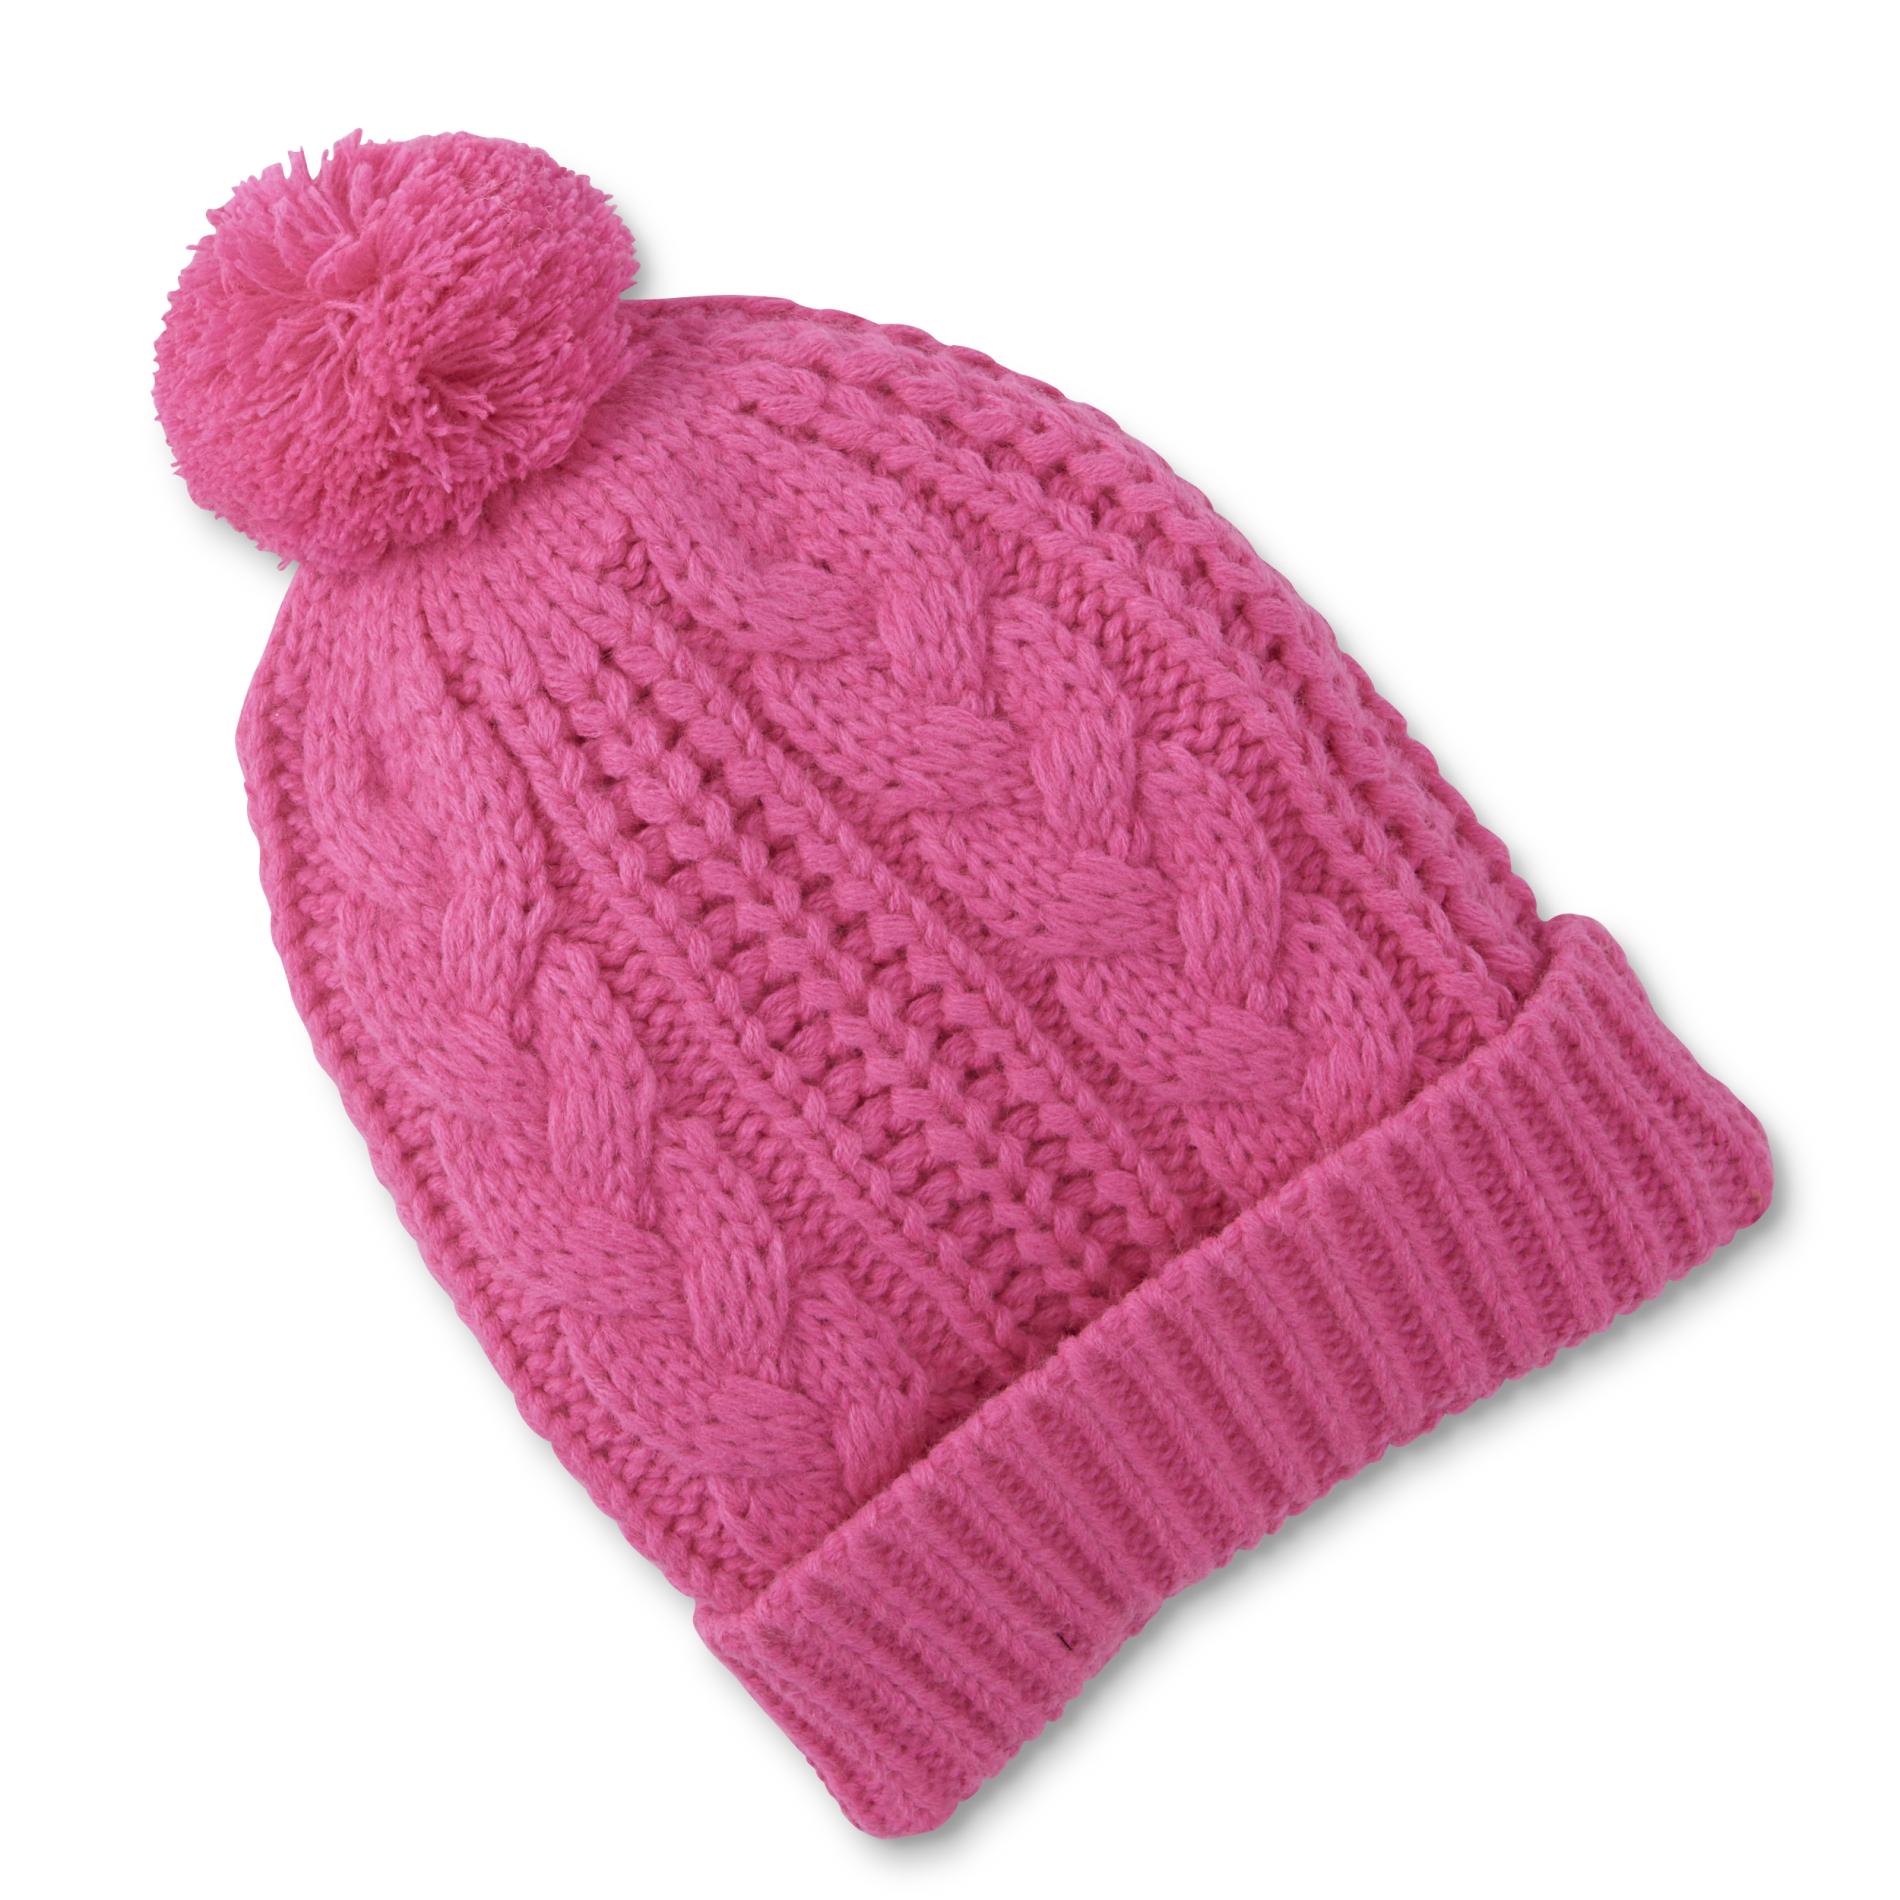 Women's Cable Knit Beanie Hat